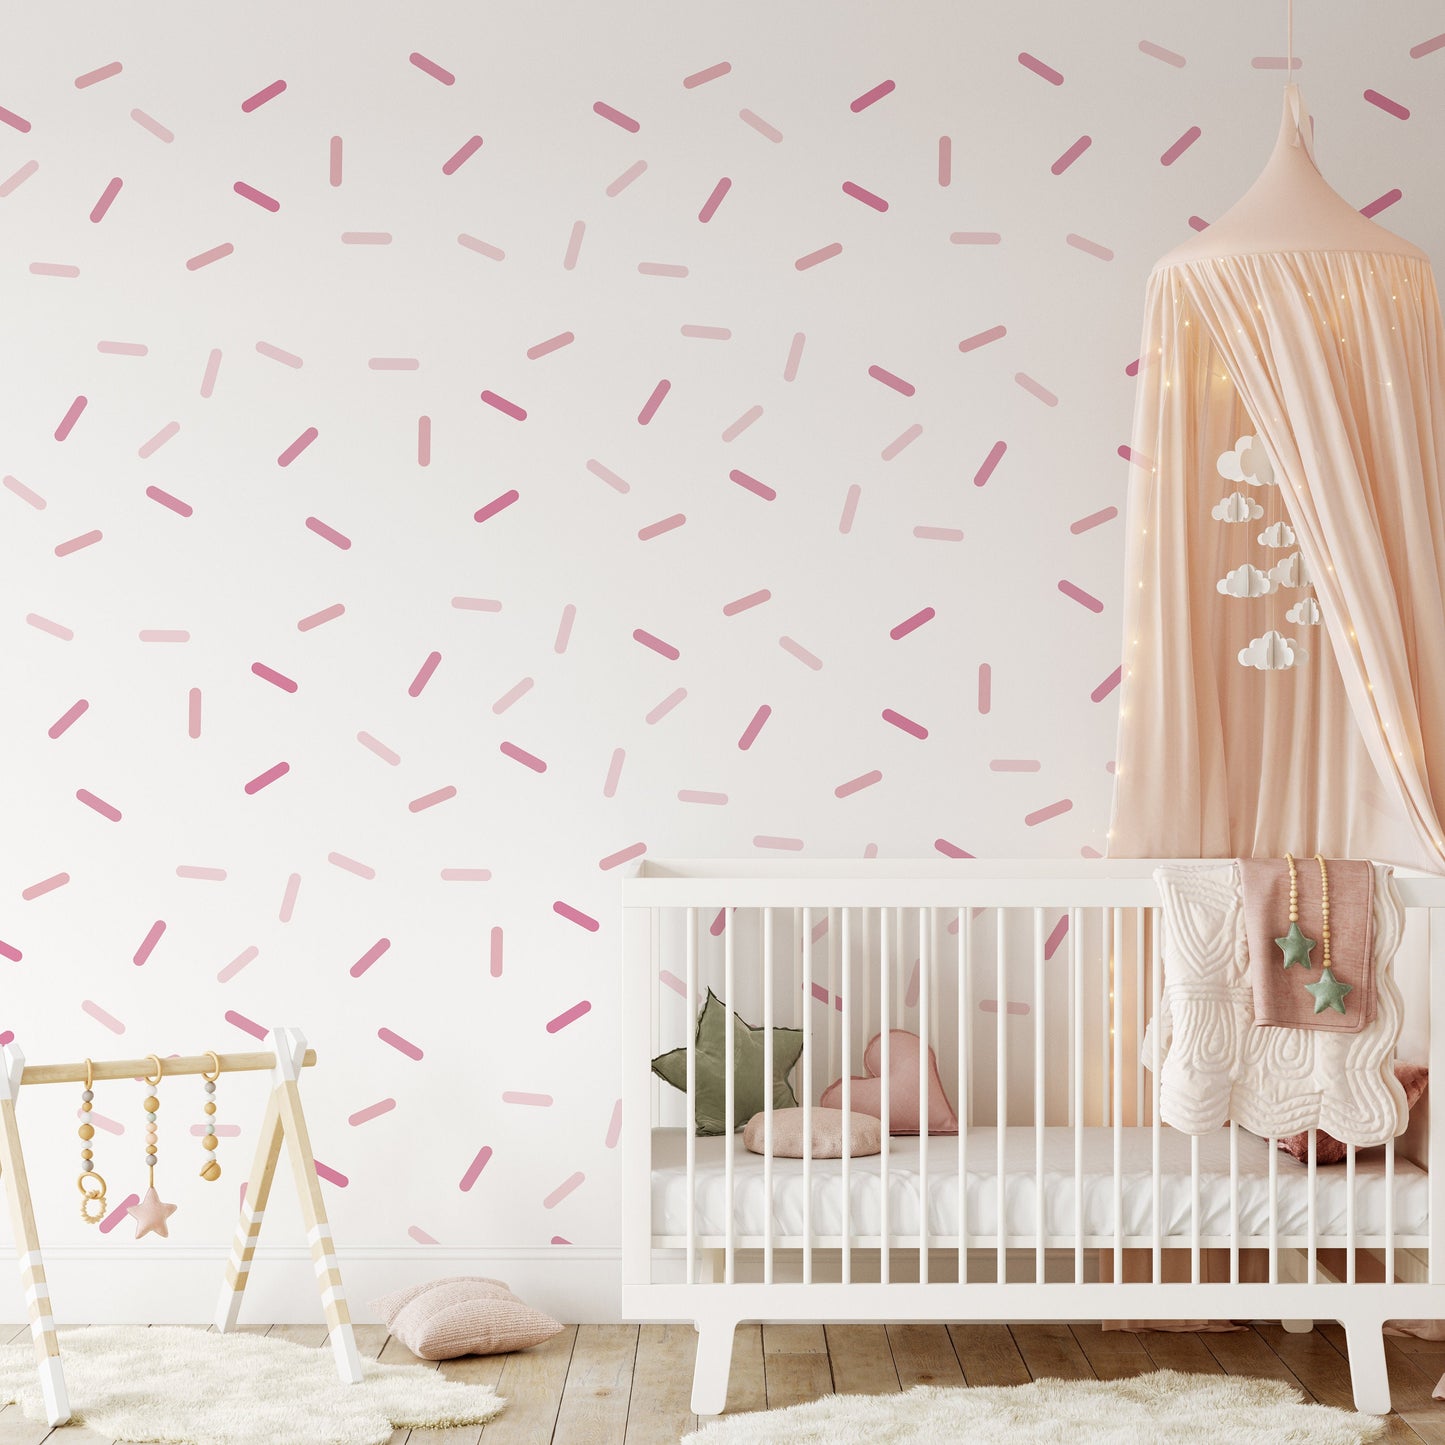 Pink Shades Sprinkle Wall Decal Stickers For Kids & Nursery Rooms